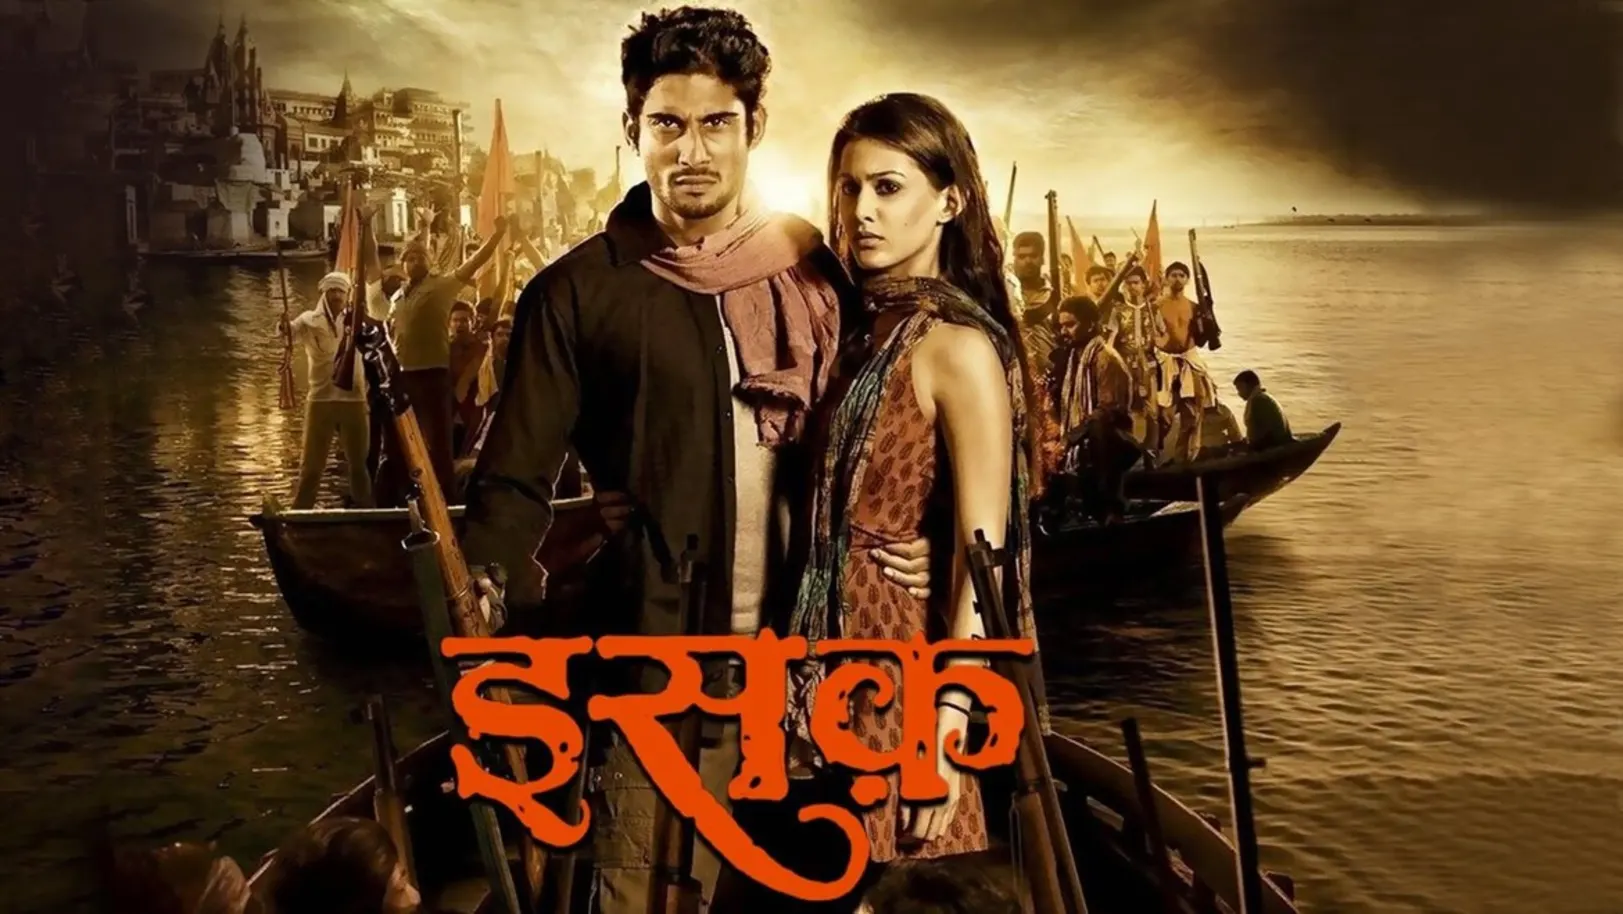 Issaq Streaming Now On Zee Bollywood